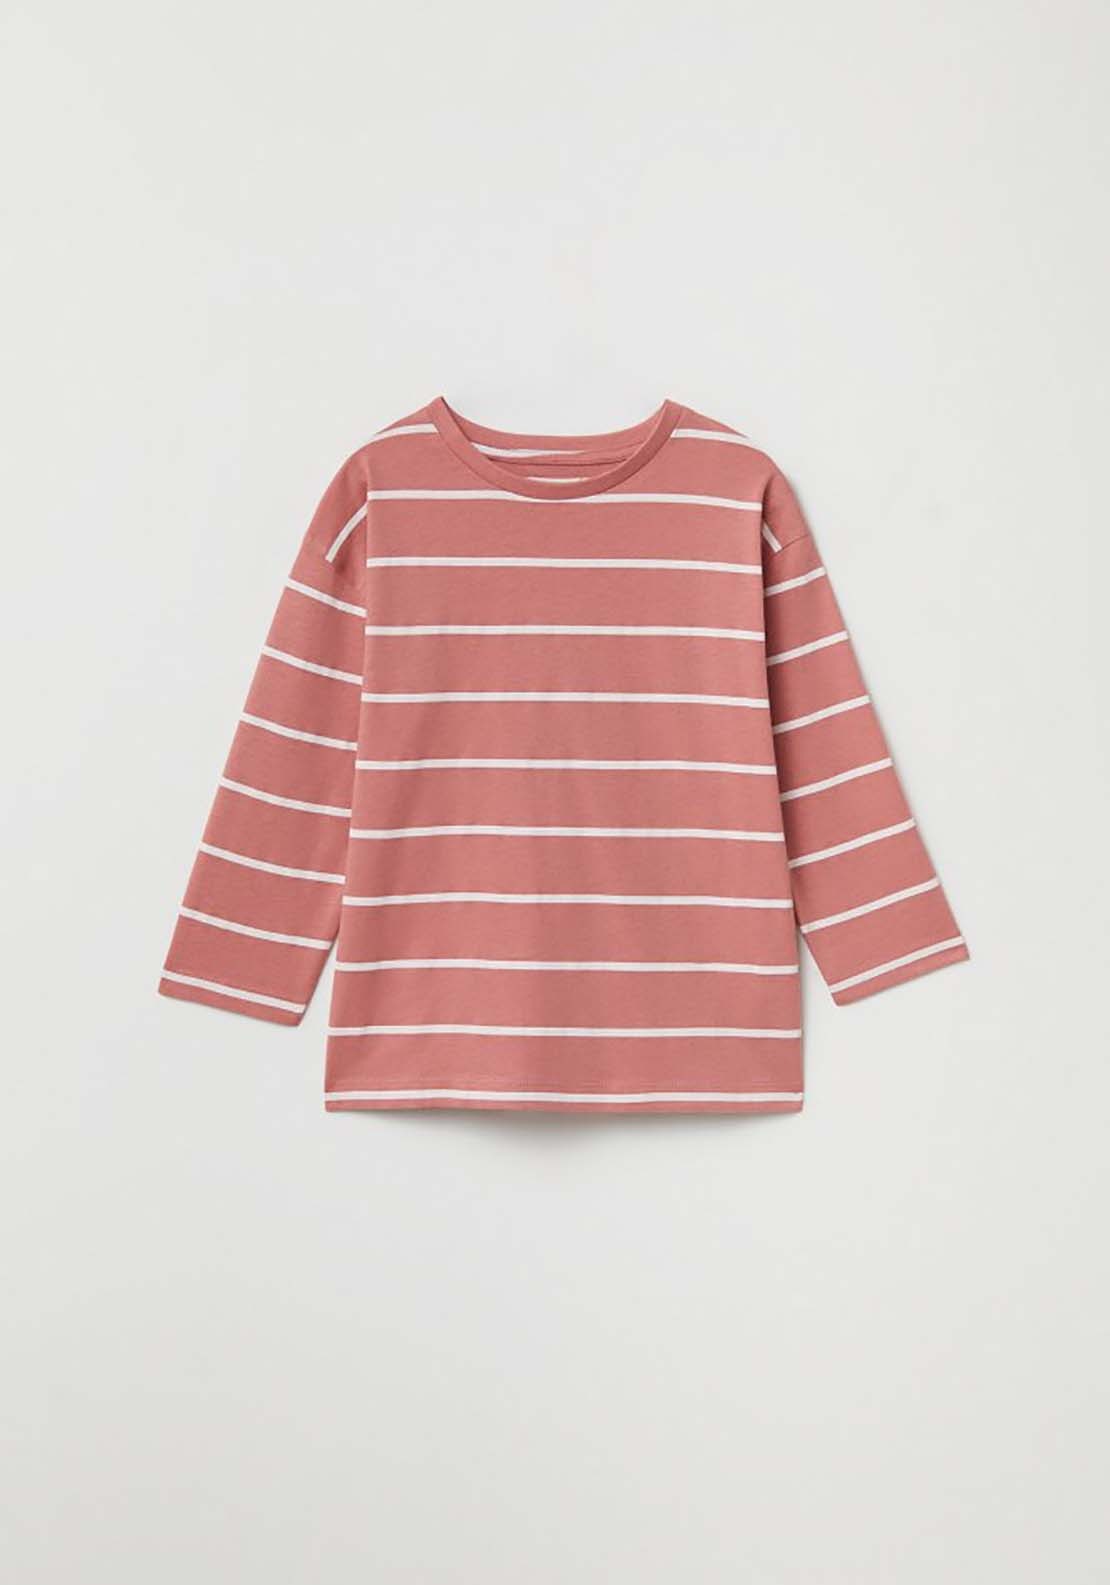 Sfera Striped T-Shirt - Red 1 Shaws Department Stores